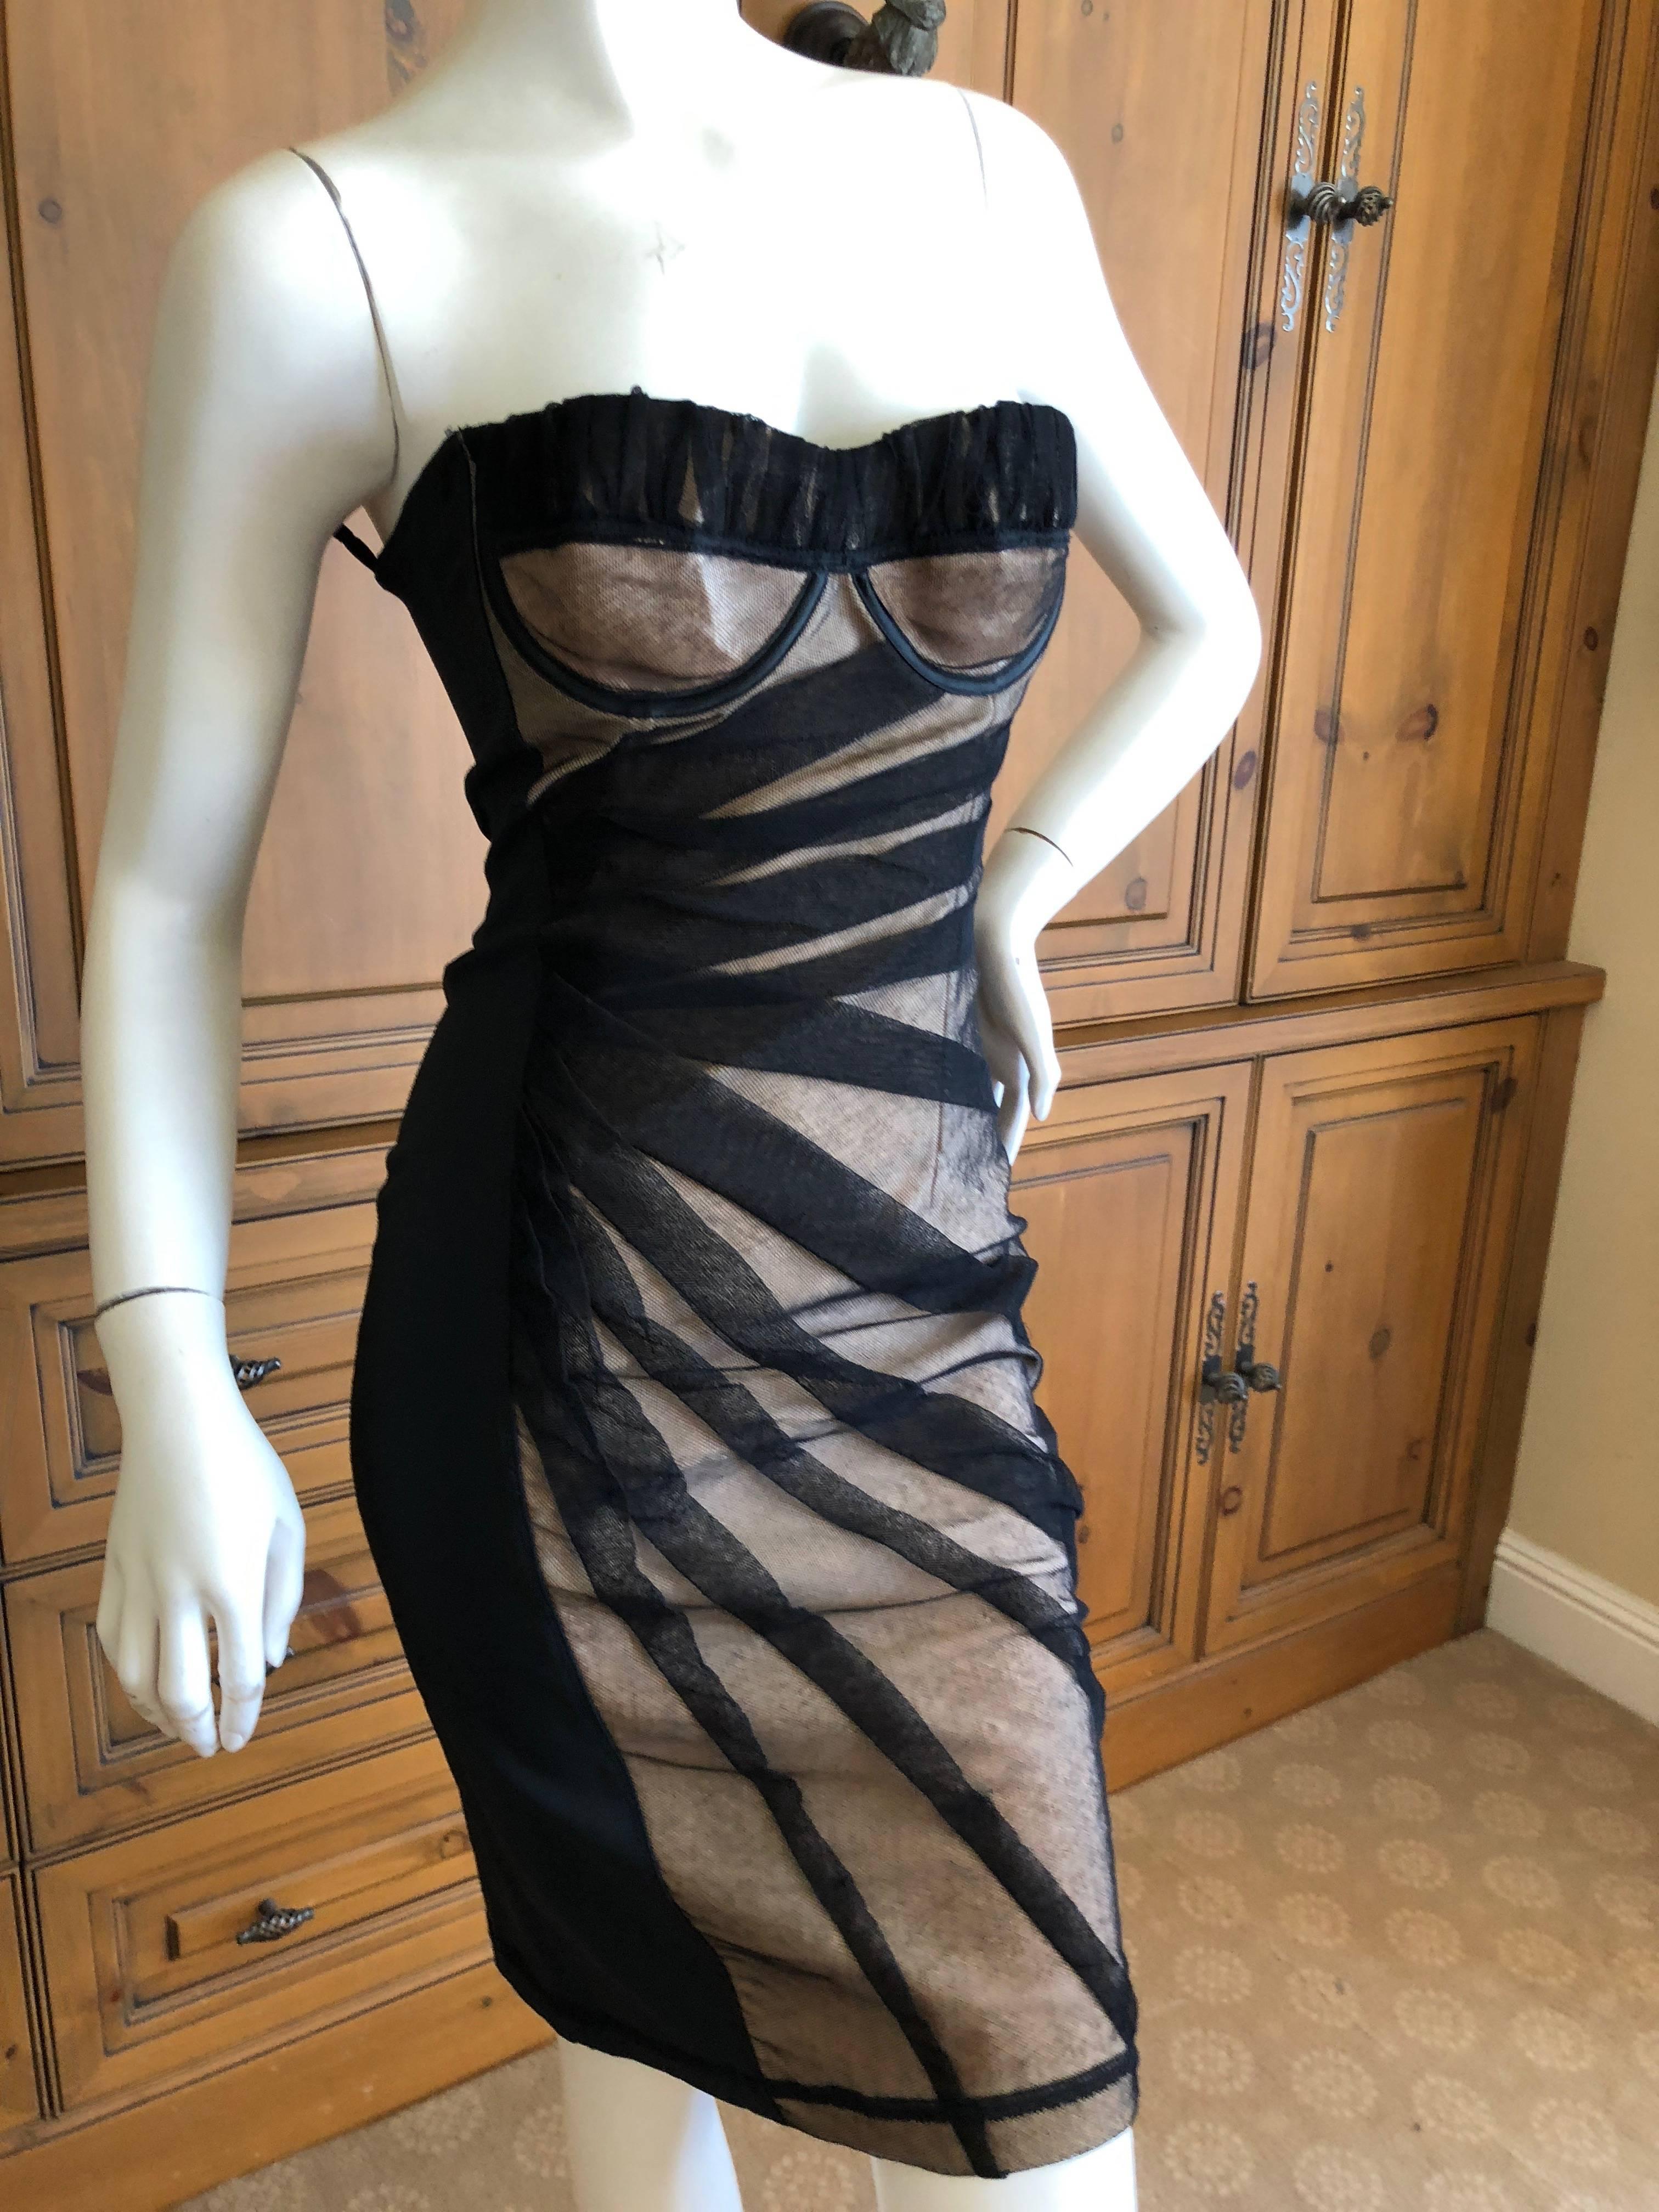   D&G by Dolce & Gabbana Super Sexy Black Net Vintage Strapless Cocktail Dress In Excellent Condition For Sale In Cloverdale, CA